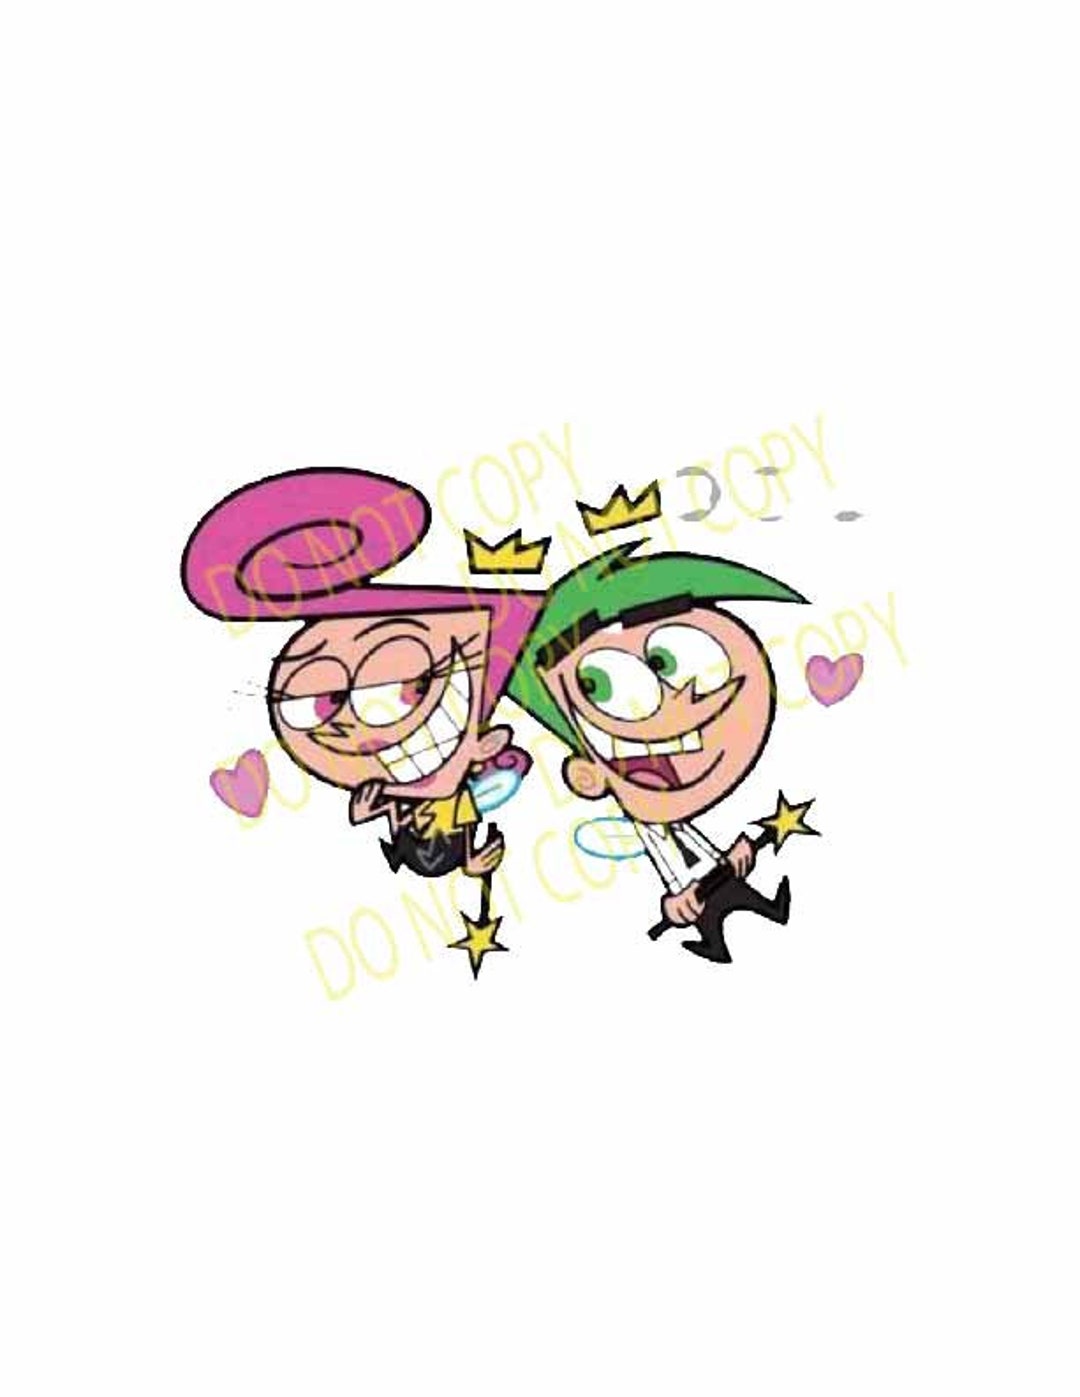 1080px x 1397px - Png File Full Color Cosmo and Wanda Fairly Odd Parents - Etsy